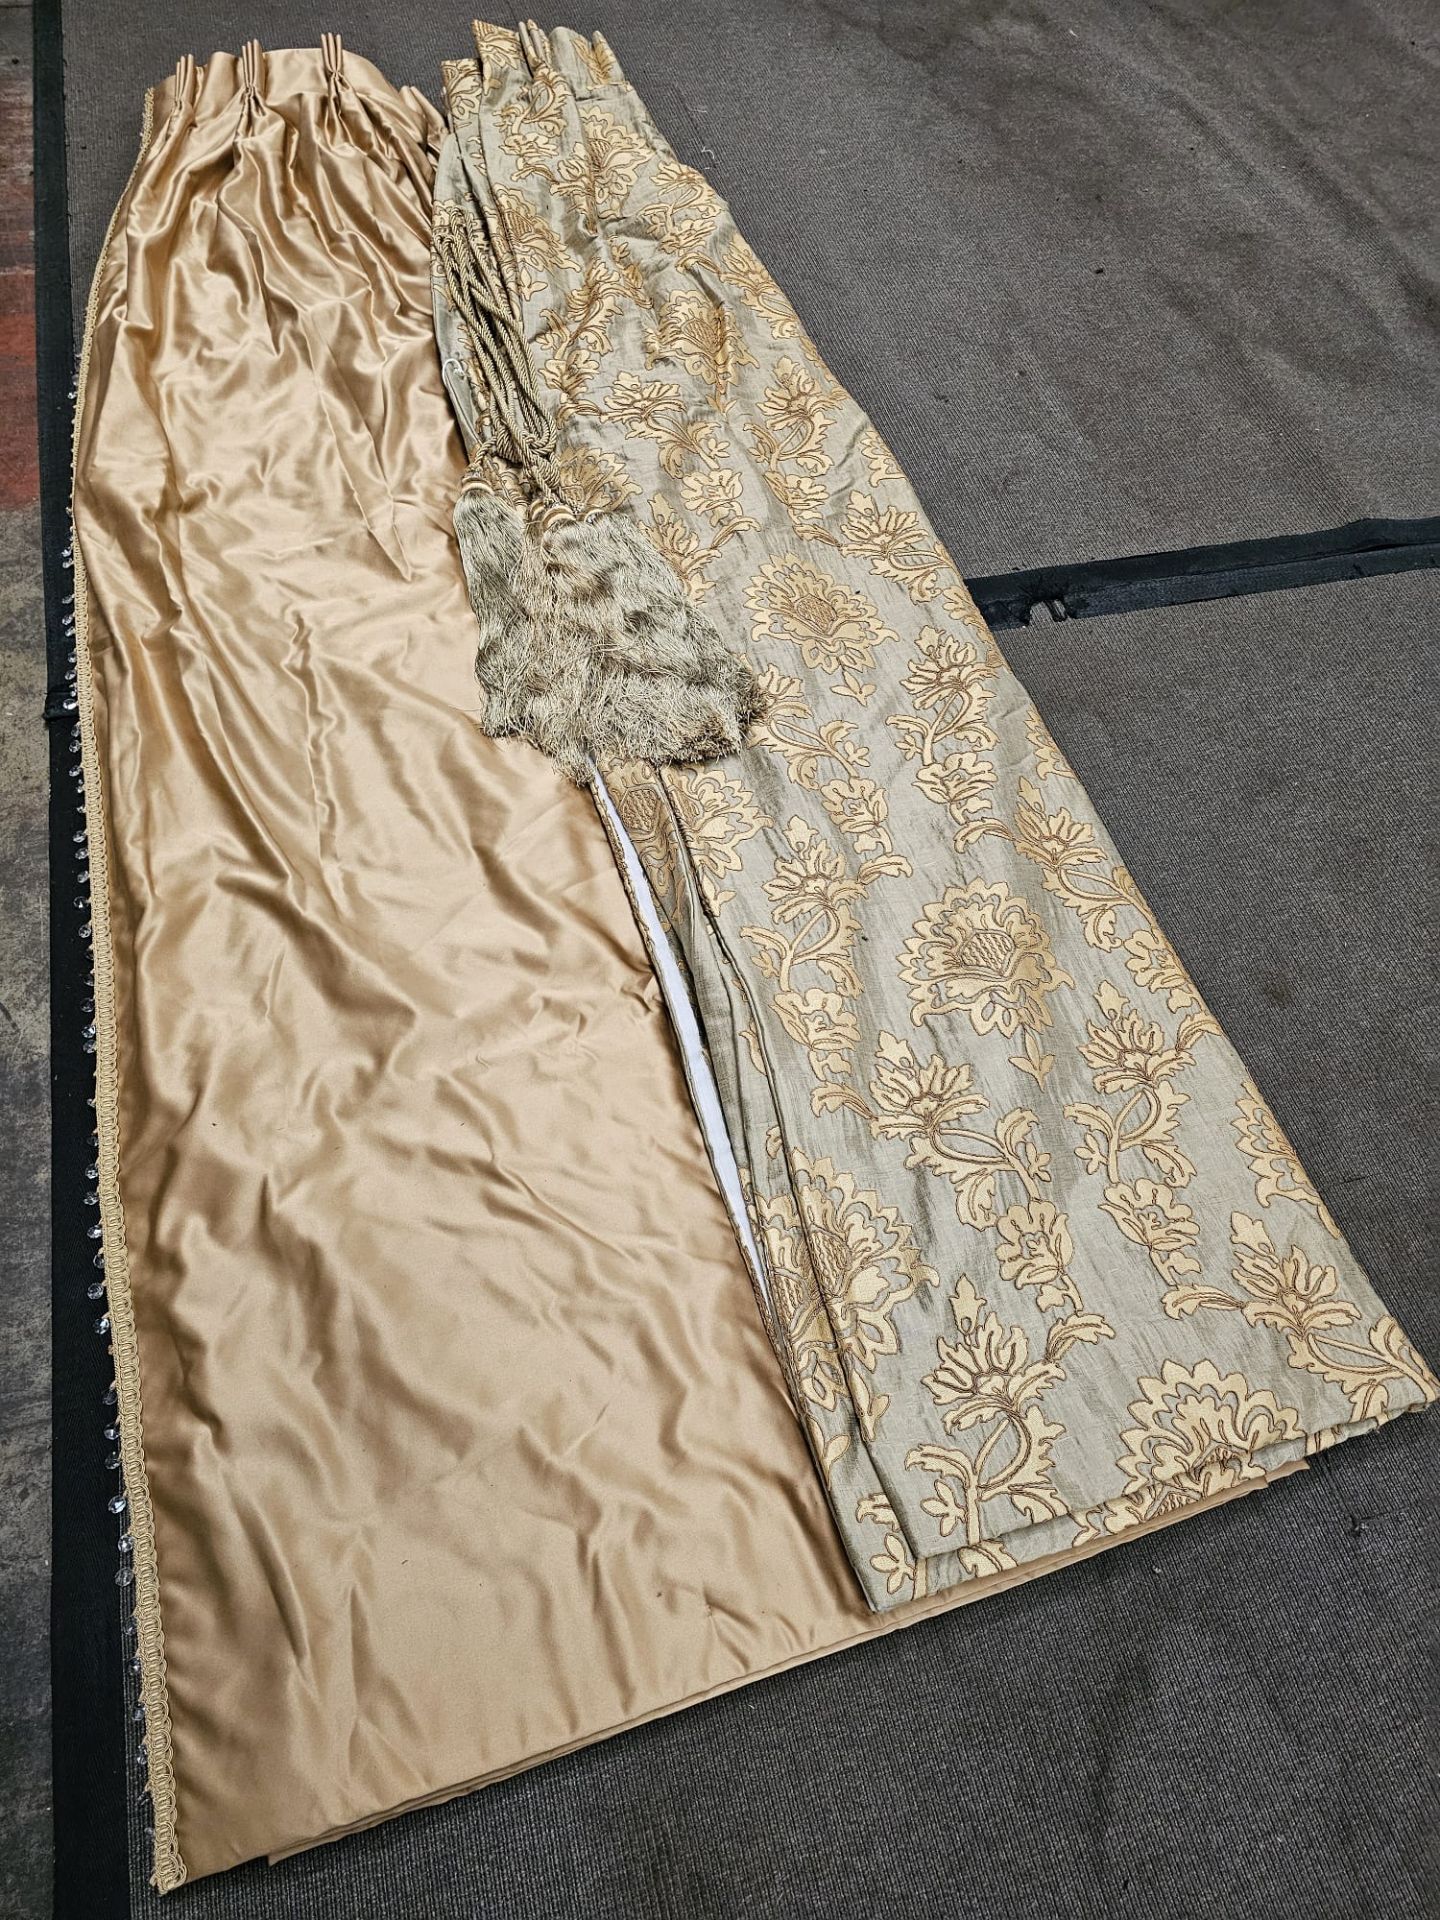 A pair of silk drapes and jabots gold with crystal trim and  embroidered iwith gold silver pattern